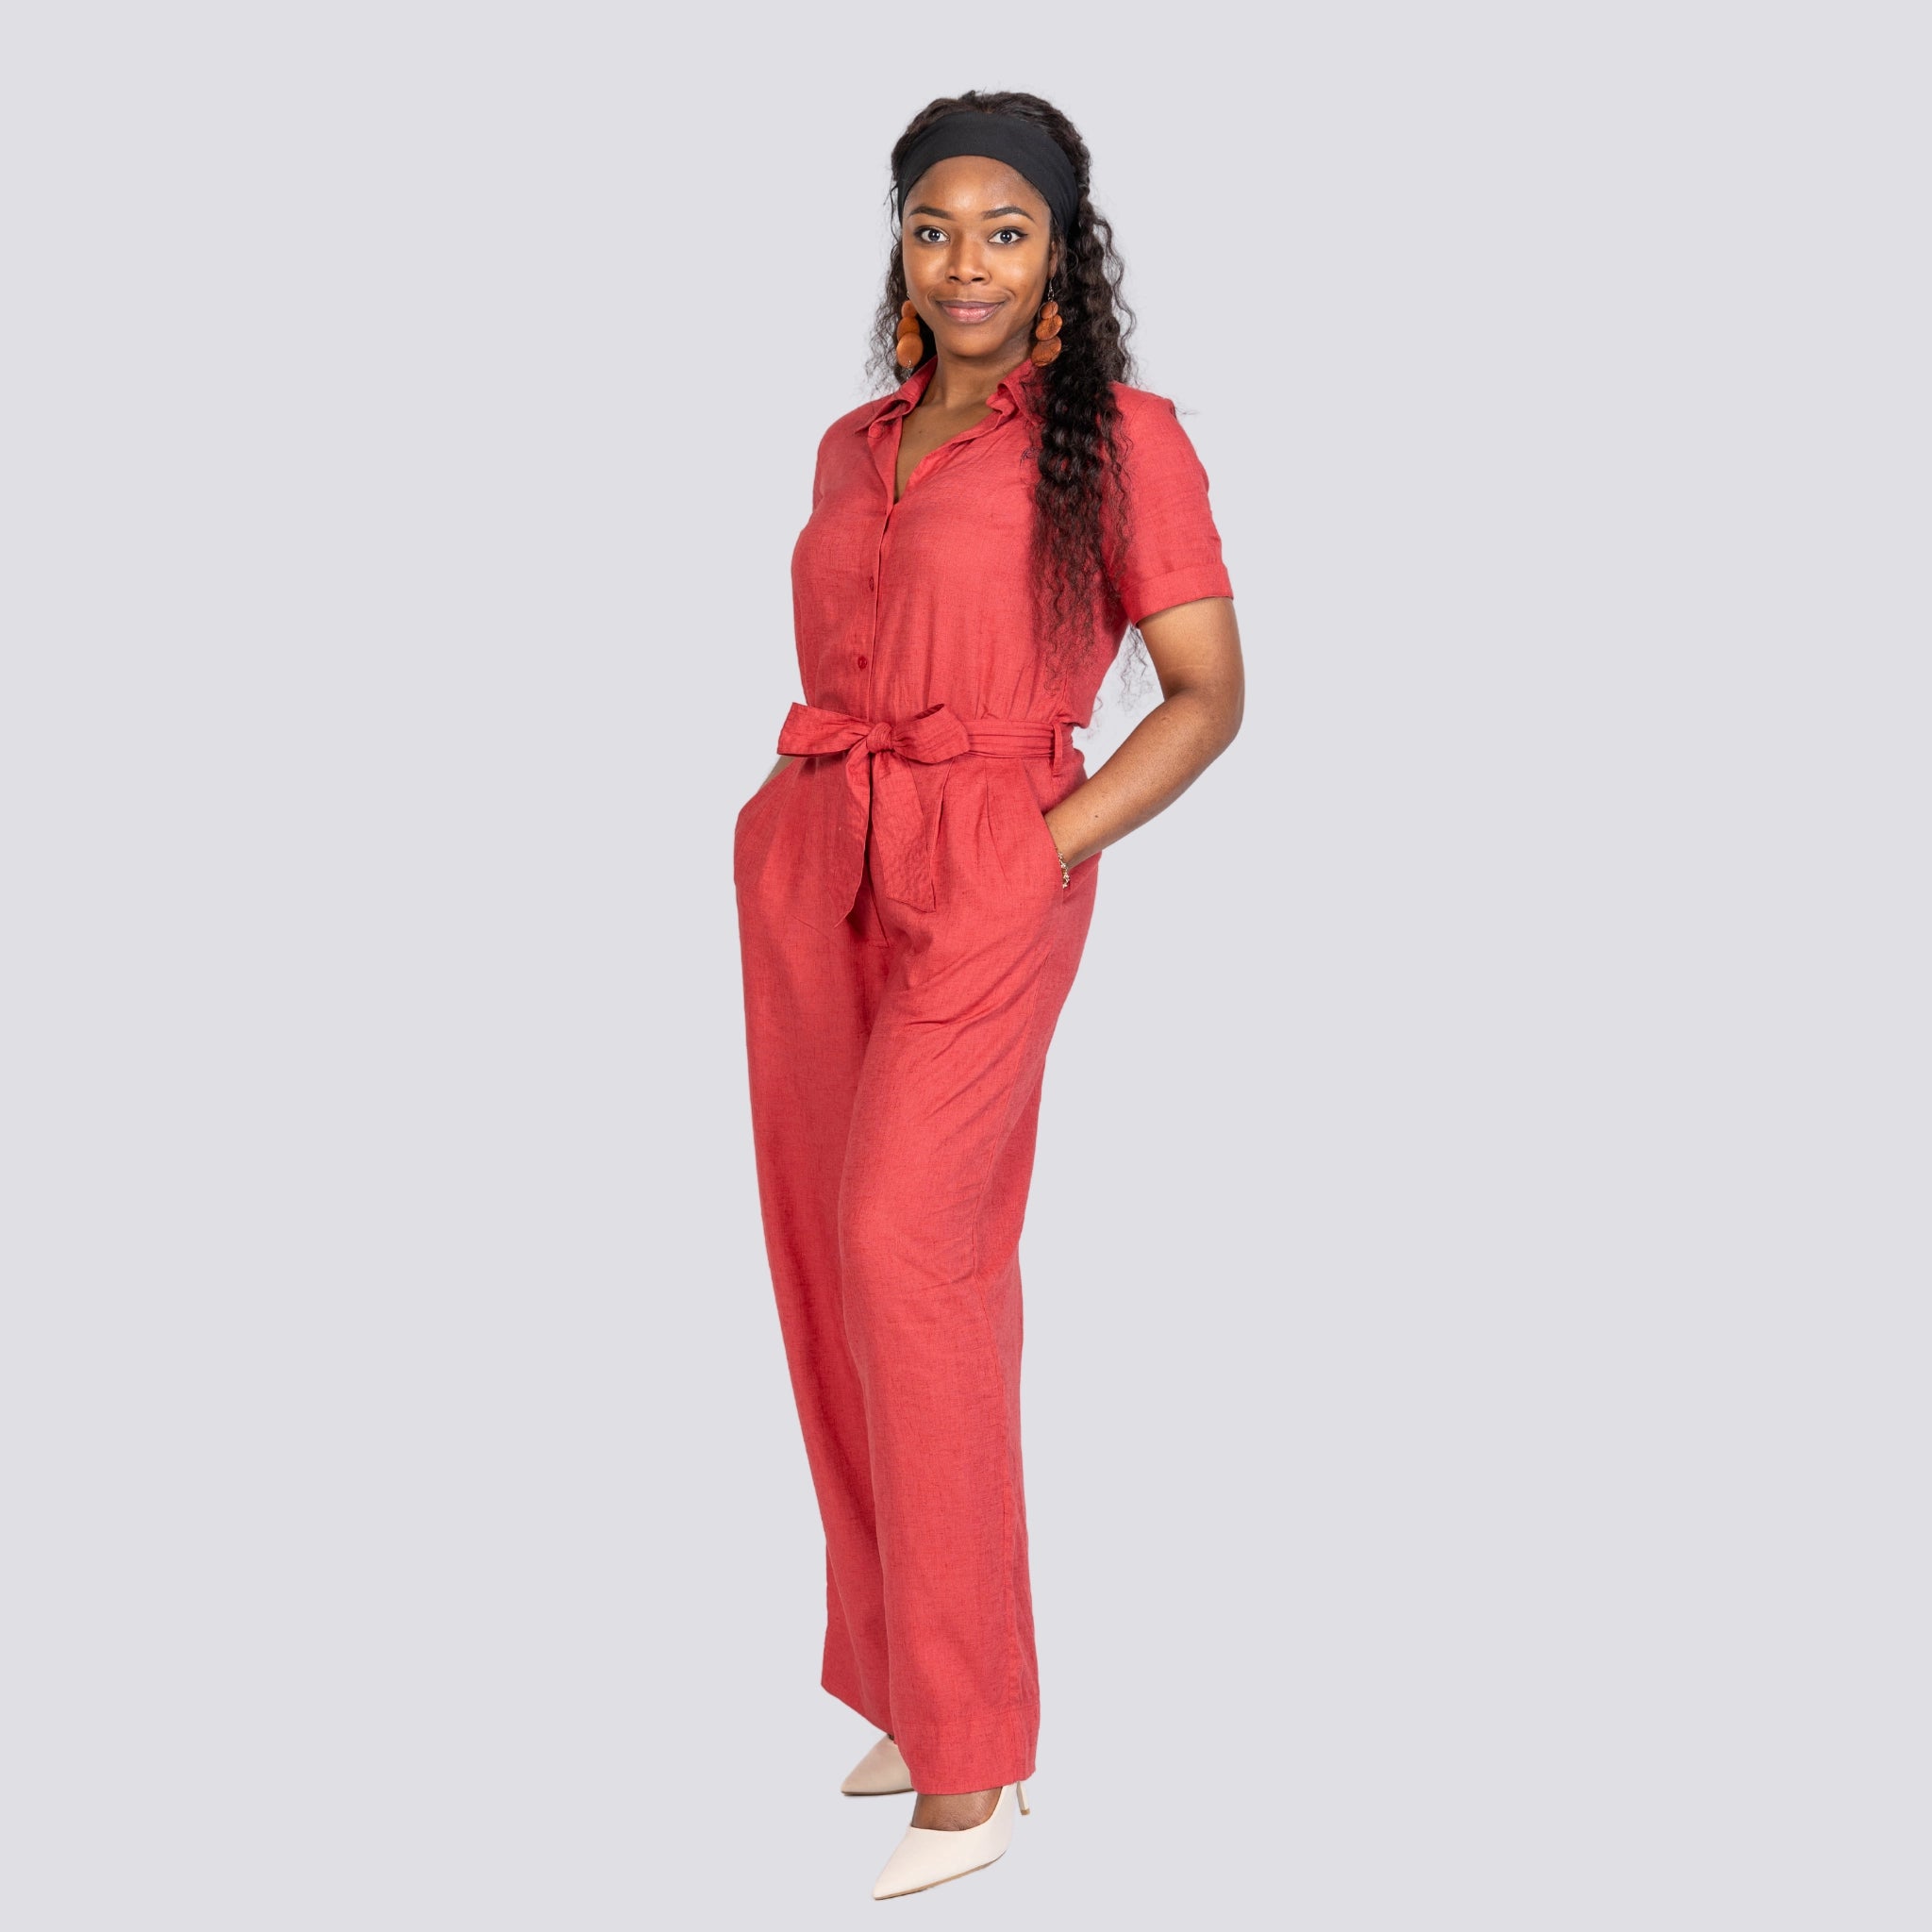 Woman wearing a Karee Milano Red Serenity Viscose Linen Jumpsuit with a tied waist belt, standing confidently with hands on hips against a light gray background.